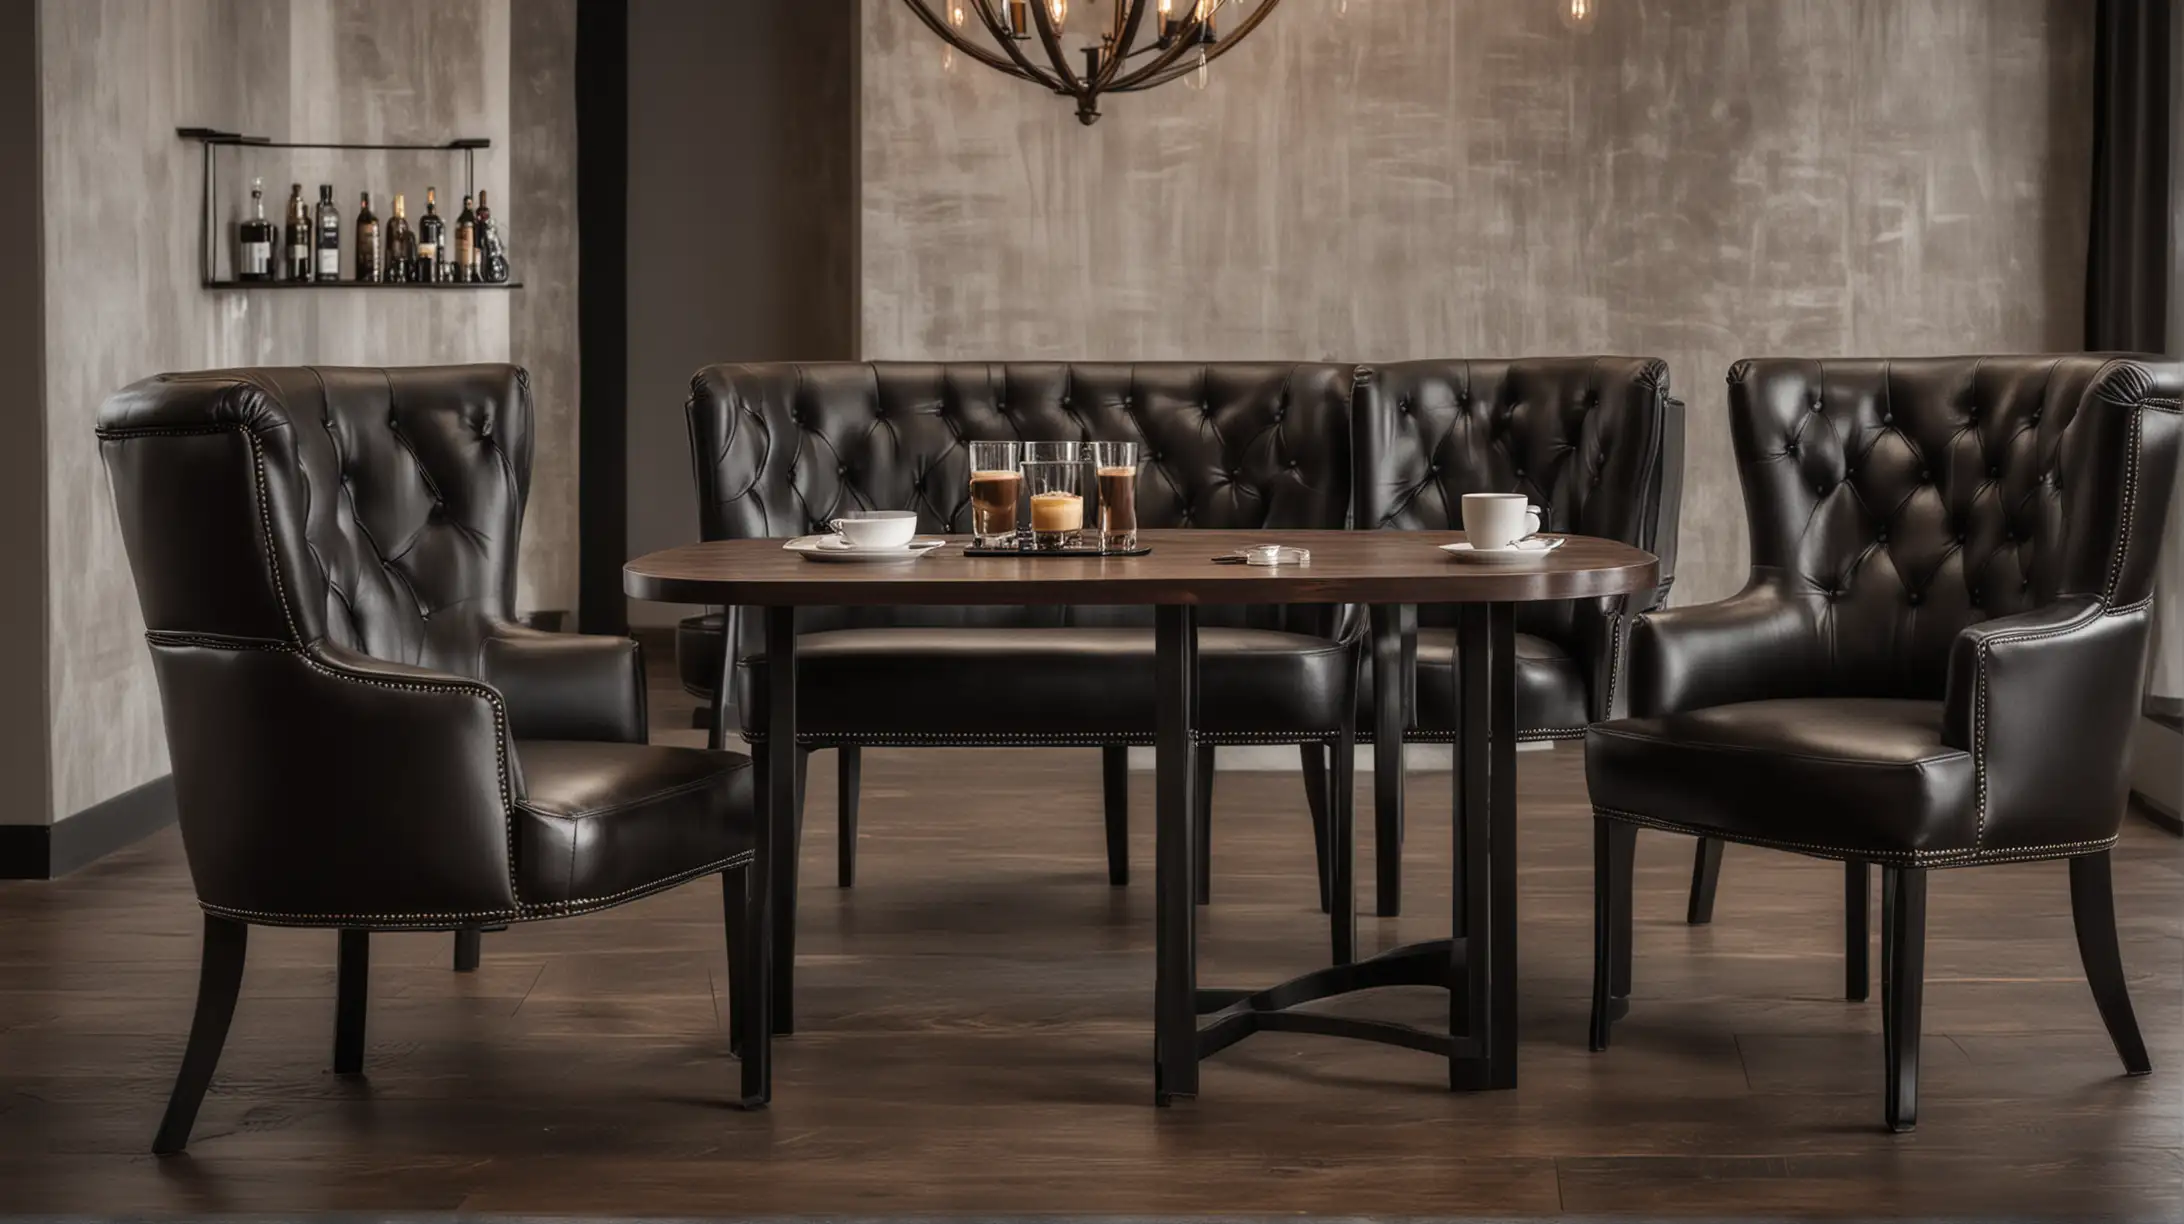 Luxurious Coffee Club with Black and Platinum Decor